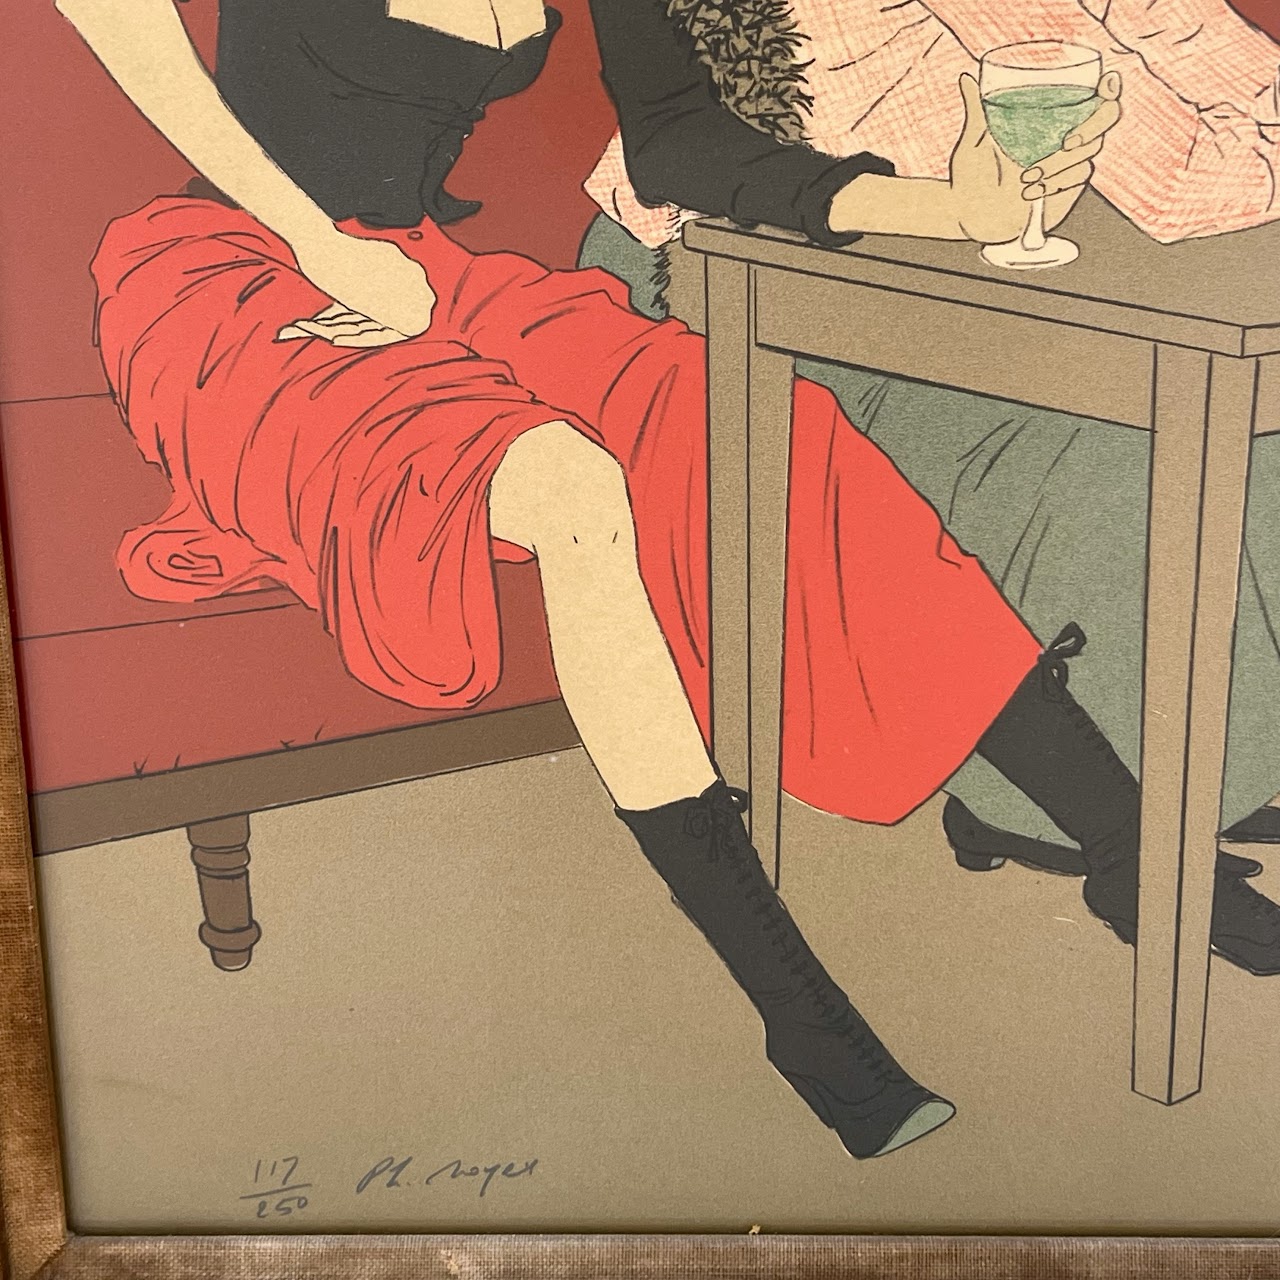 Philippe Henri Noyer 'Toulouse-Lautrec at Work' Signed Lithograph